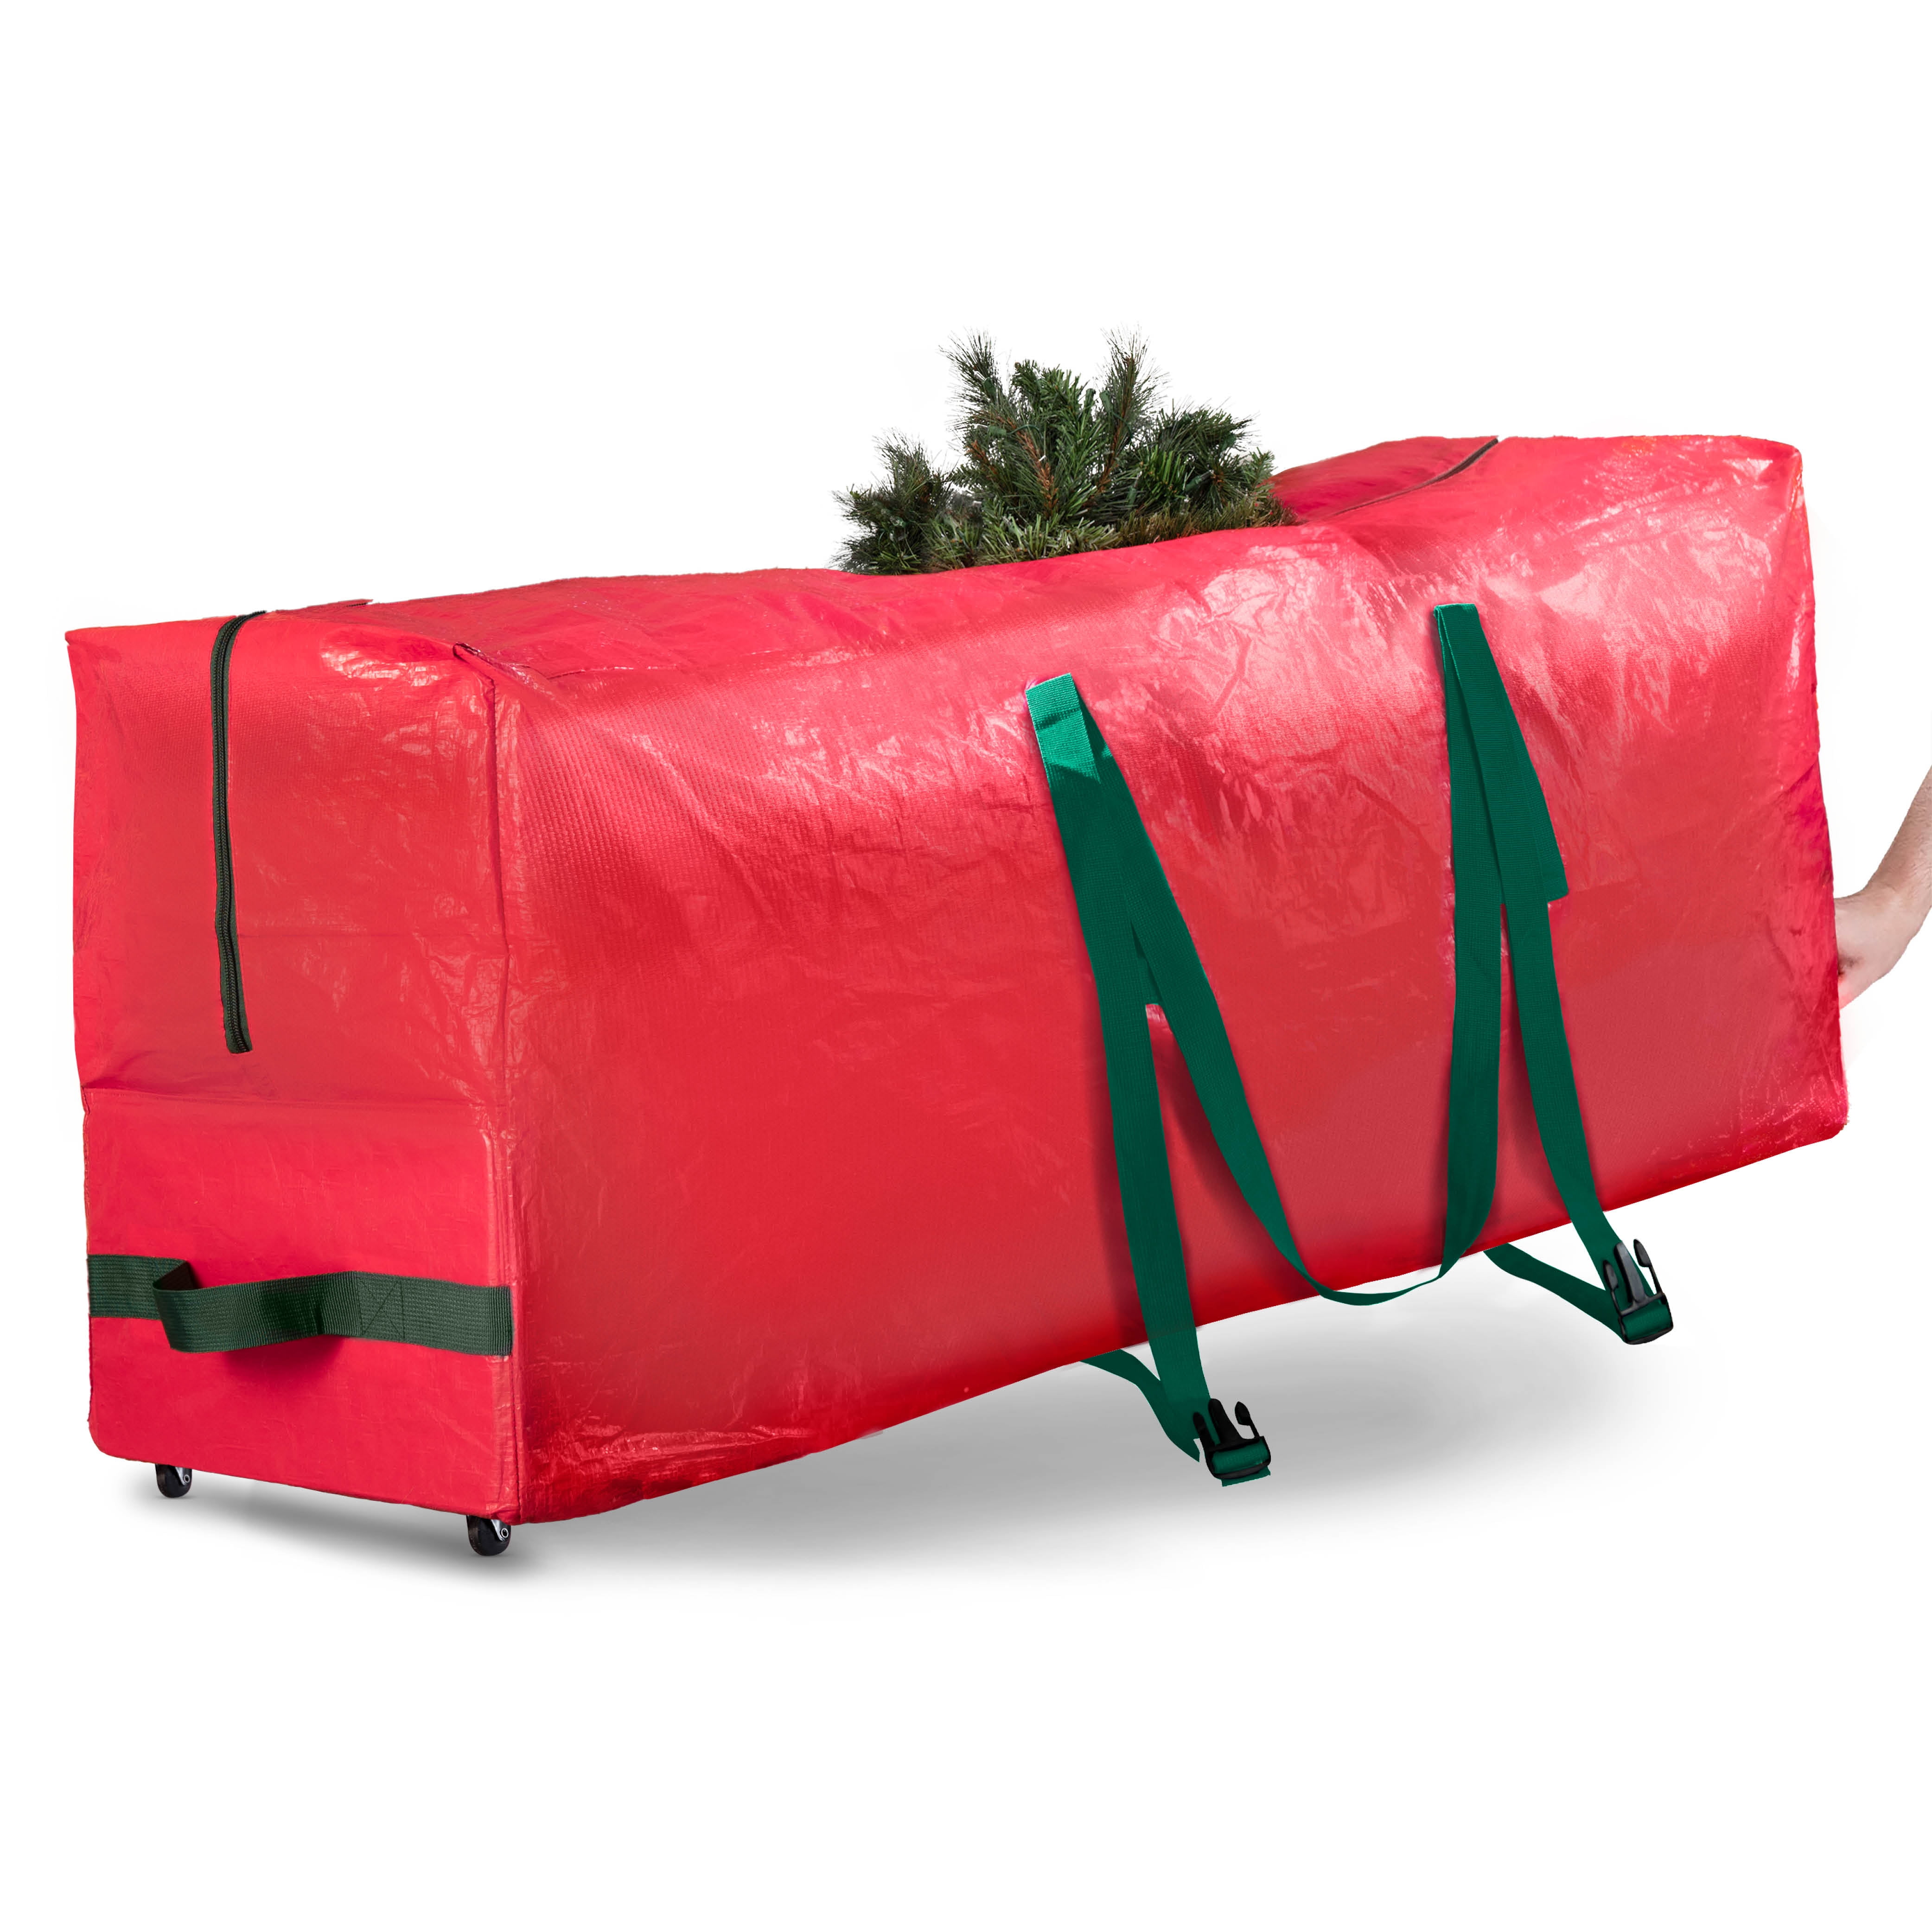 Strong & Durable High Grade Waterproof Storage Bag Ideal for Up to 9 Ft Tall Xmas Trees and other Christmas Decorations SHareconn Christmas Tree Storage Bag 9 Ft Red